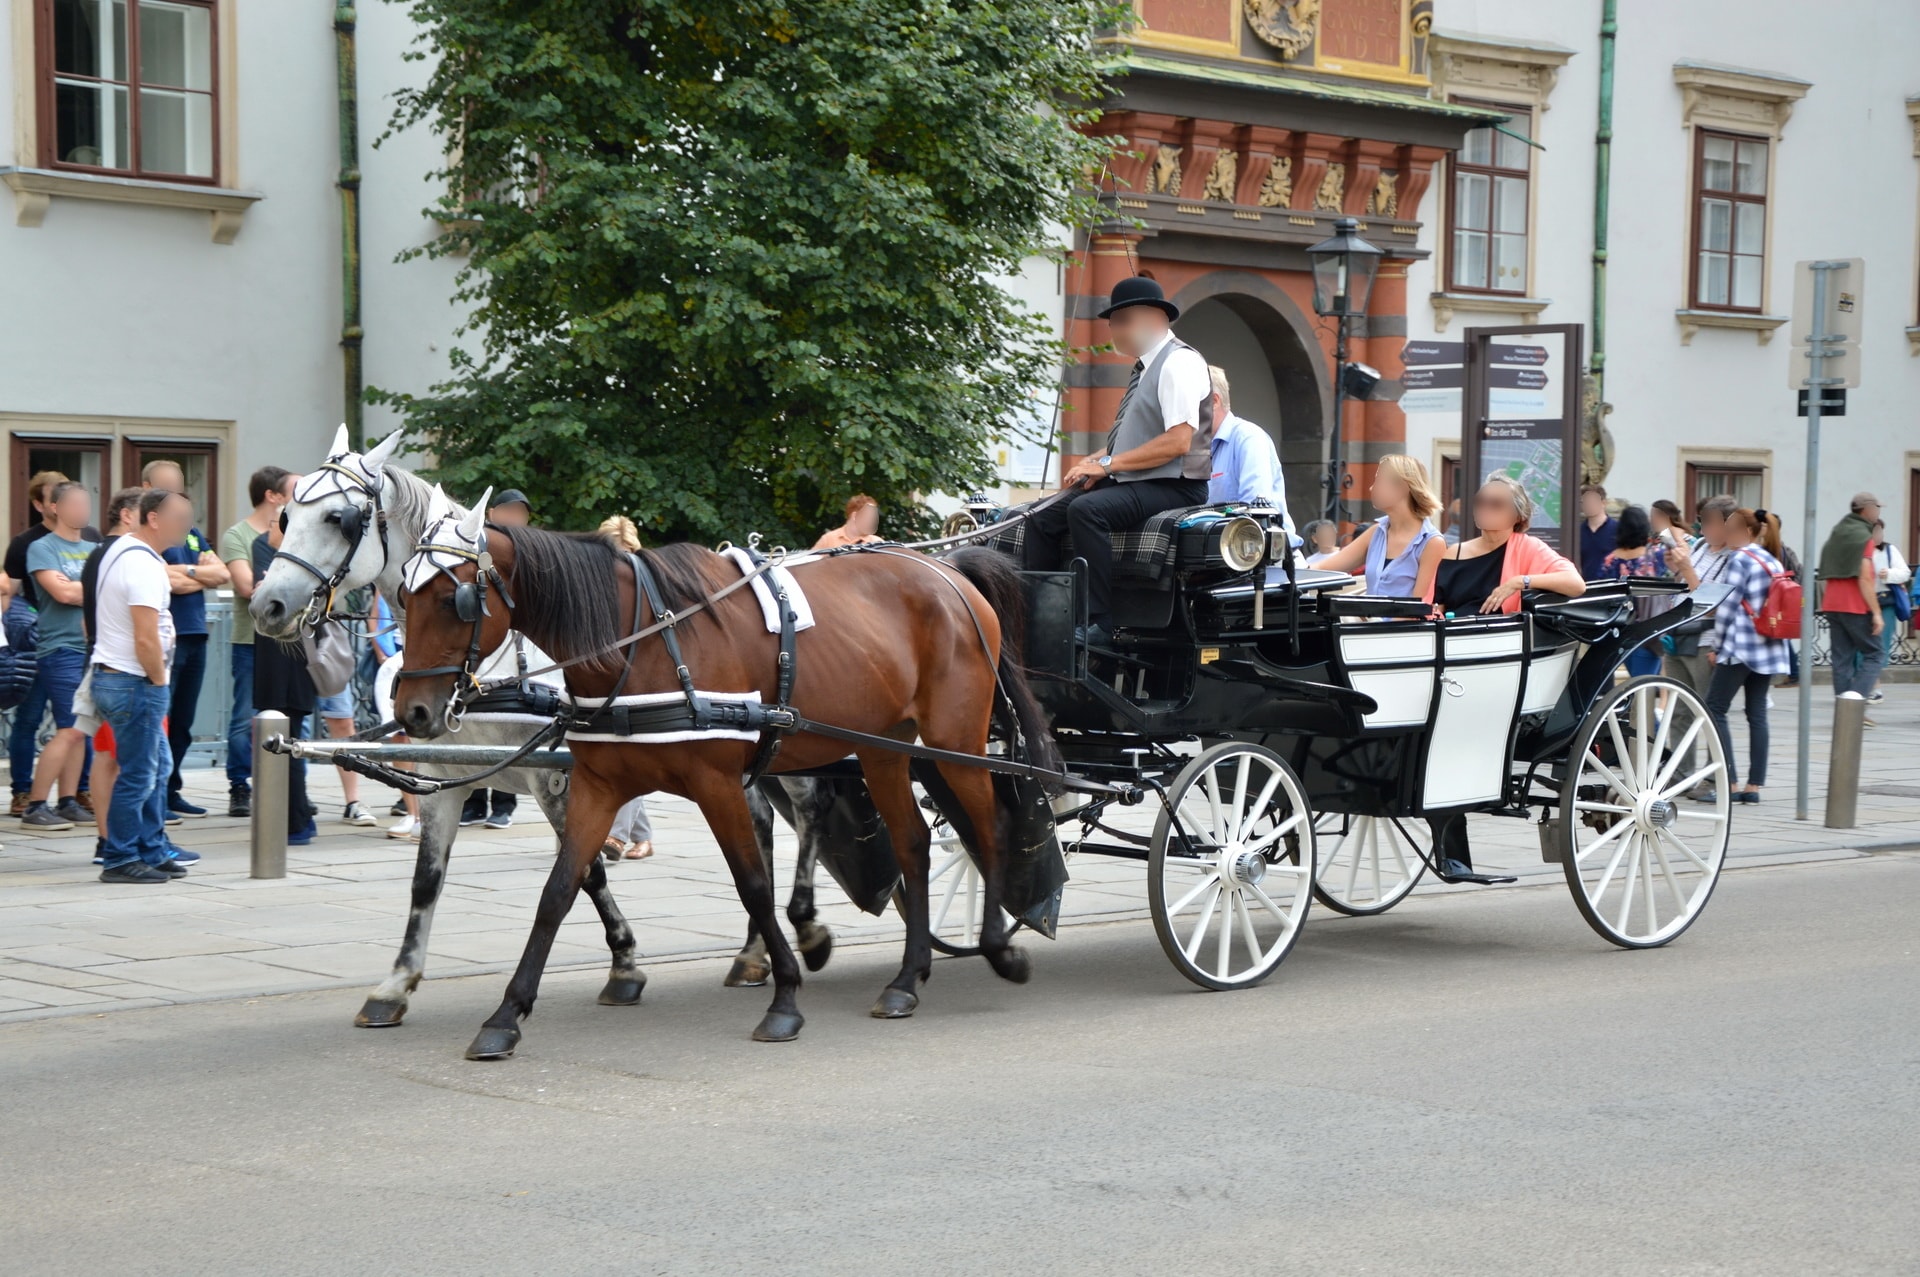 Horse-drawn carriage rides seem to be quite a popular way to explore and feel Vienna